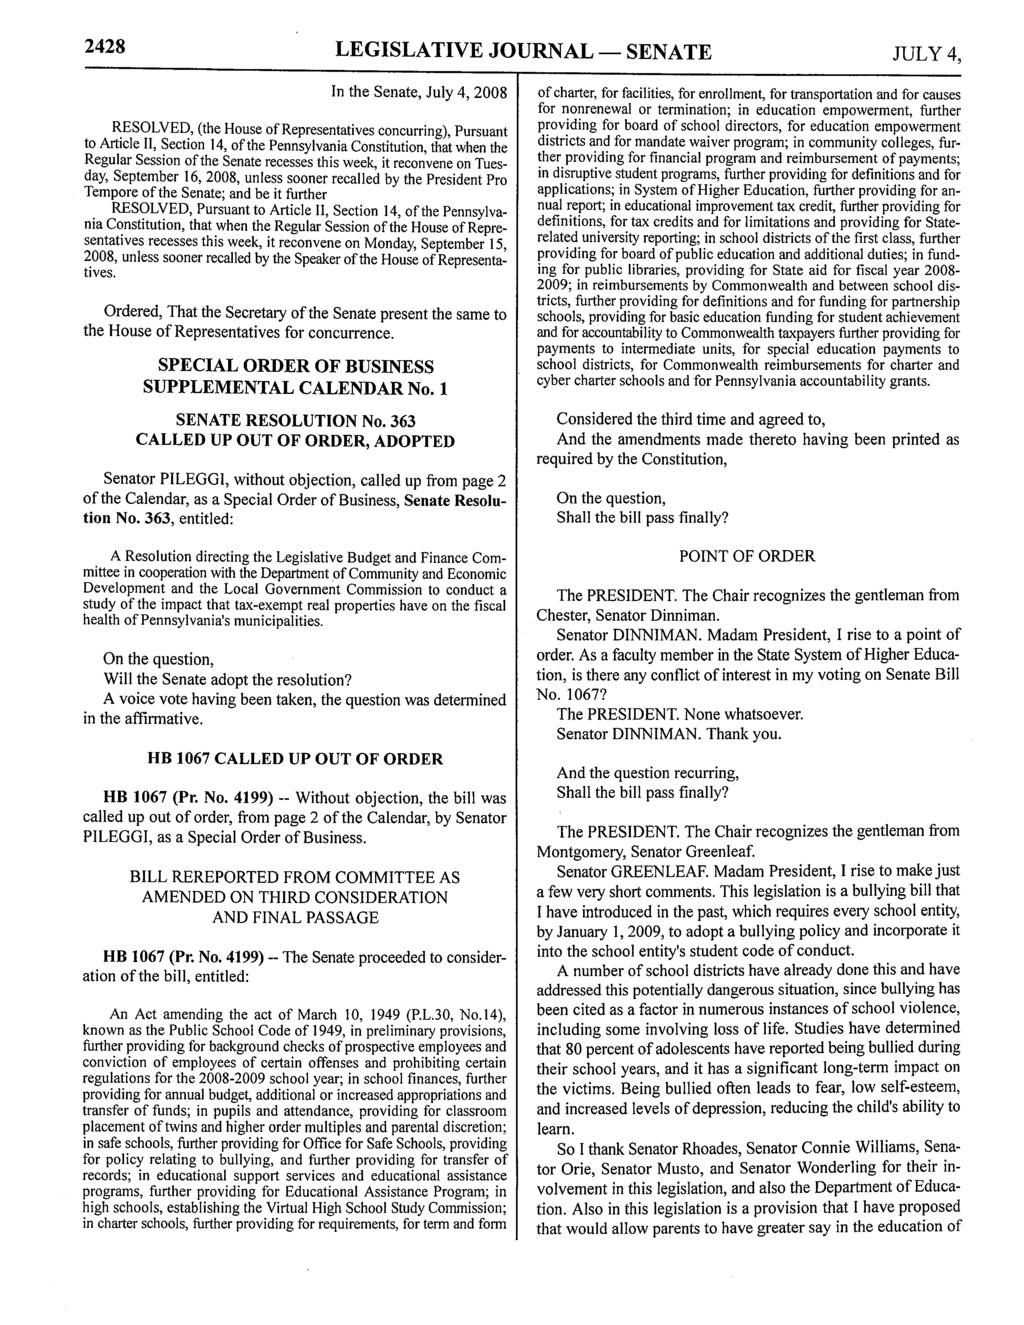 2428 LEGISLATIVE JOURNAL SENATE JULY 4, In the Senate, July 4, 2008 RESOLVED, (the House of Representatives concurring), Pursuant to Article II, Section 14, of the Pennsylvania Constitution, that